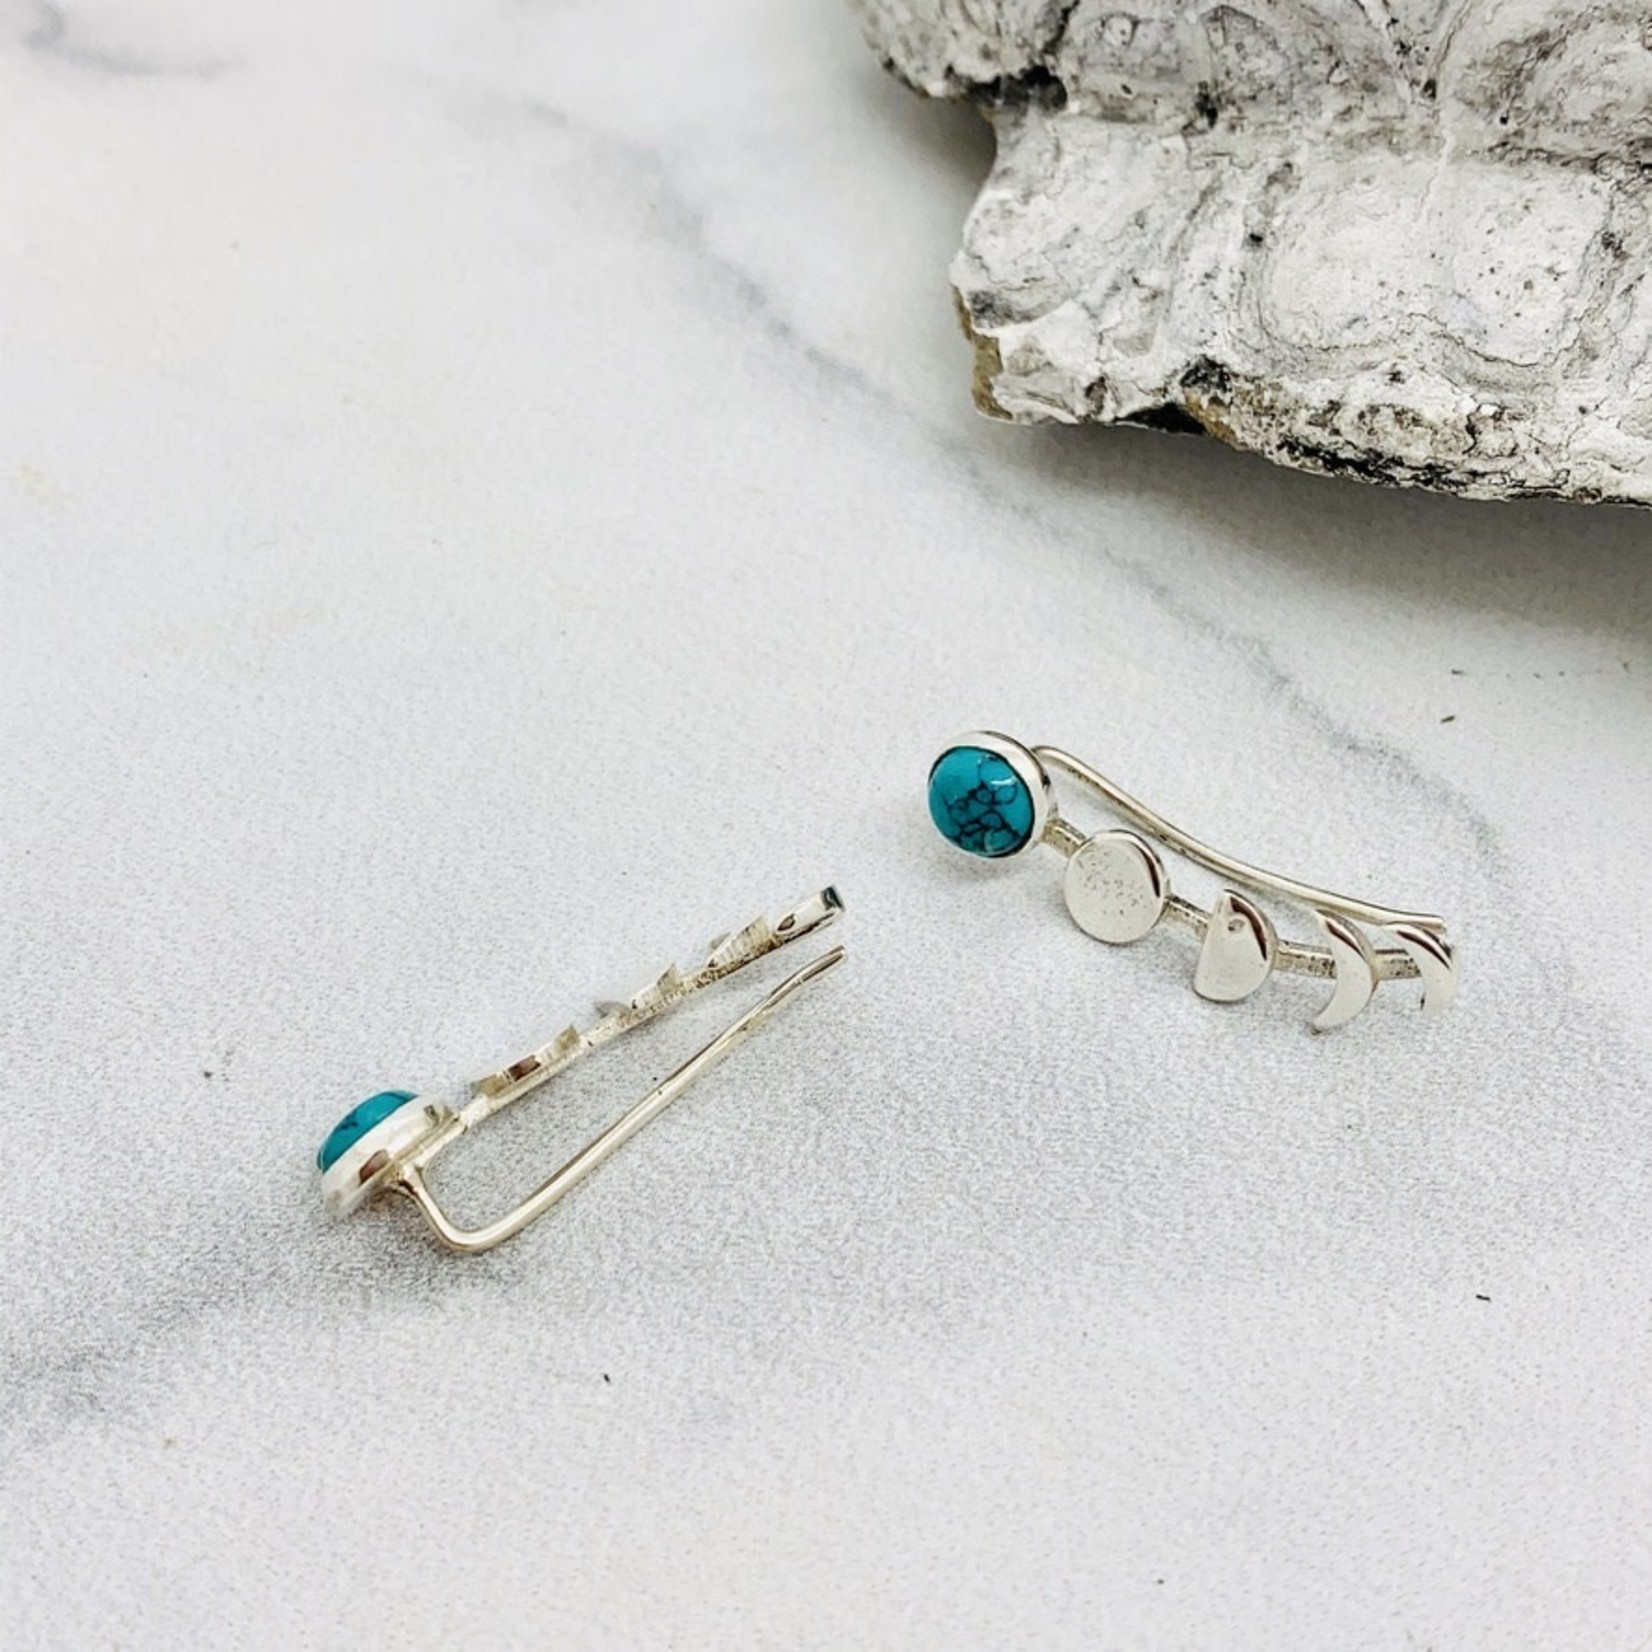 Baizaar Moon phases sterling silver ear climber with Turquoise